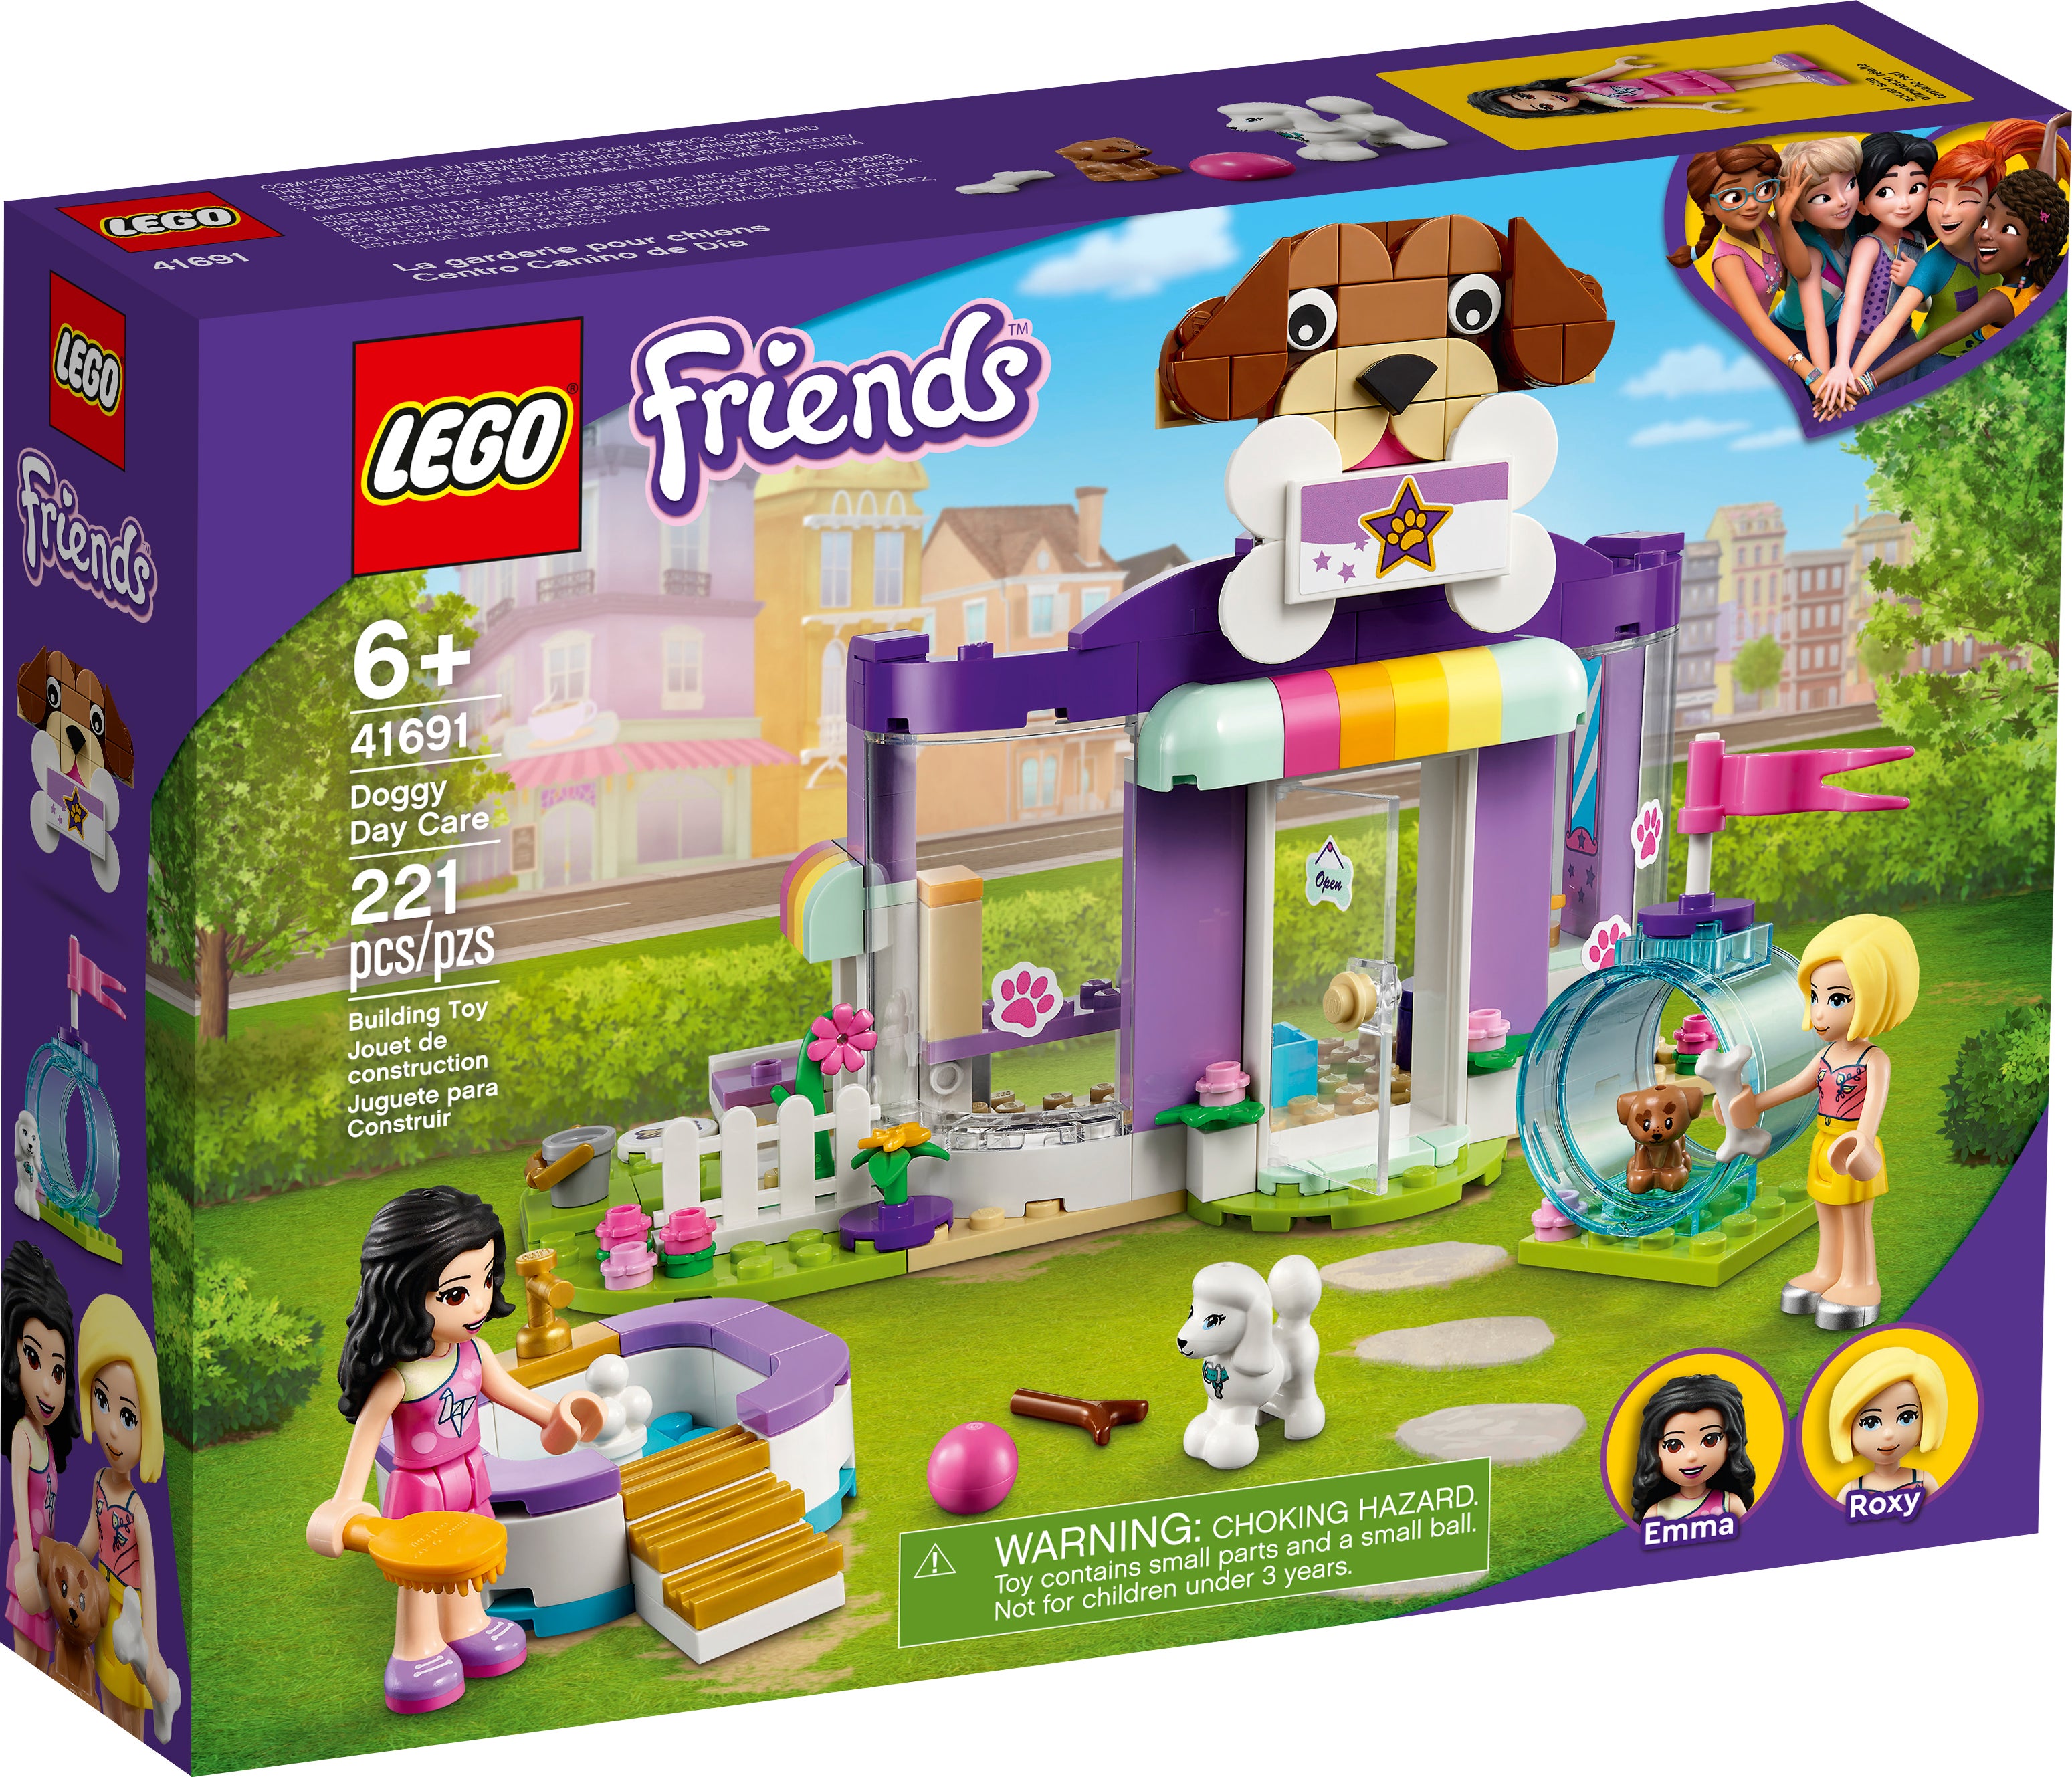 Details about   Lego 41691 Friends Doggy Day Care Building Kit New with Sealed Box 